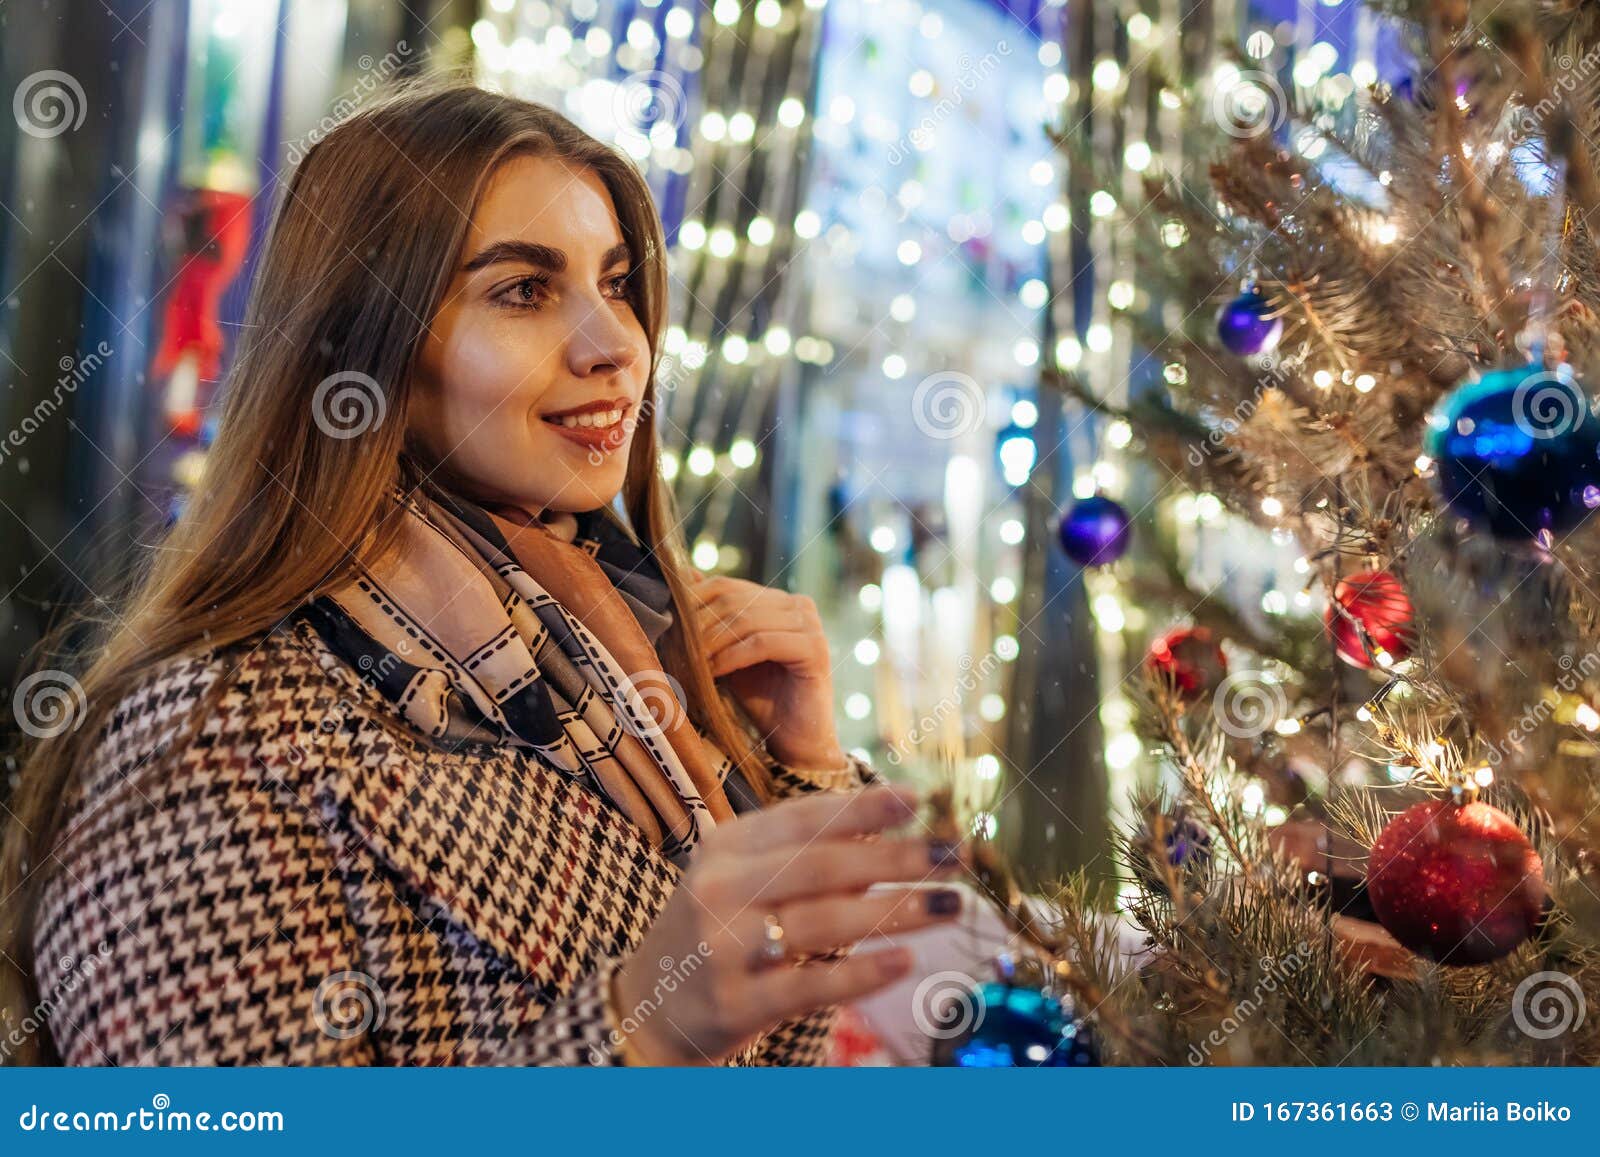 Christmas, New Year Concept. Woman Walking on City Street by Decorated ...